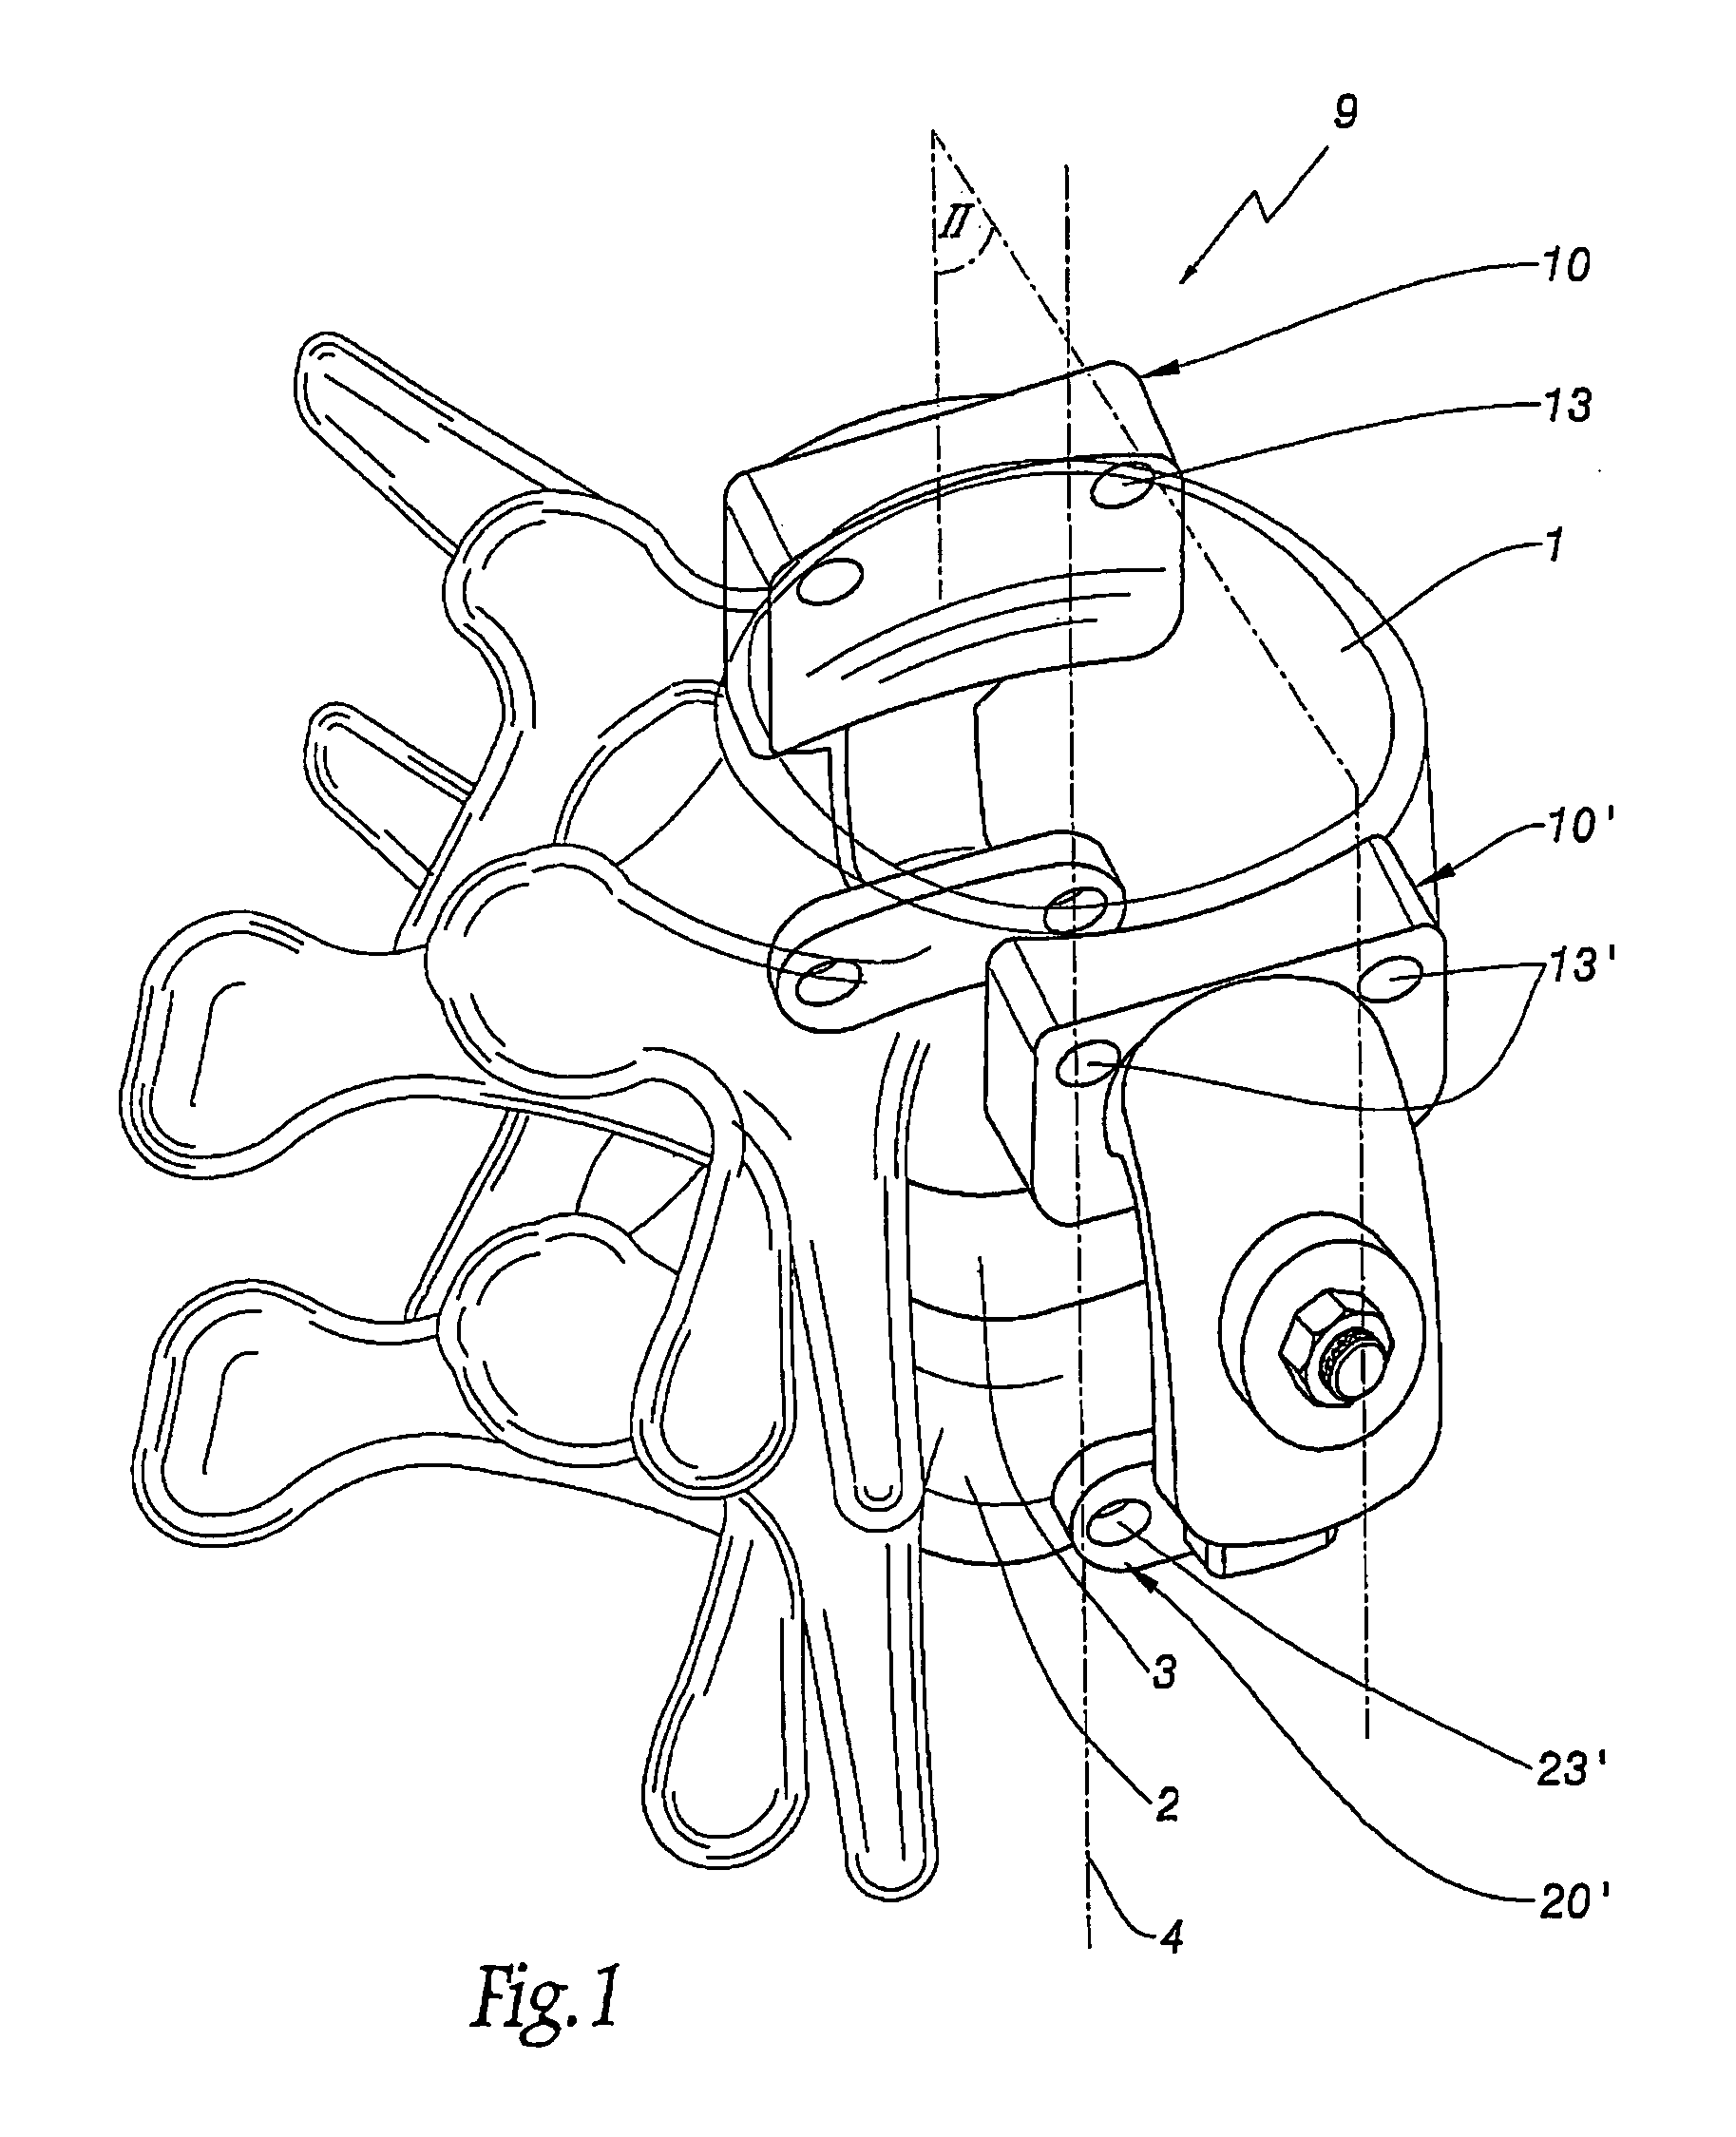 Device for the lateral stabilization of the spine